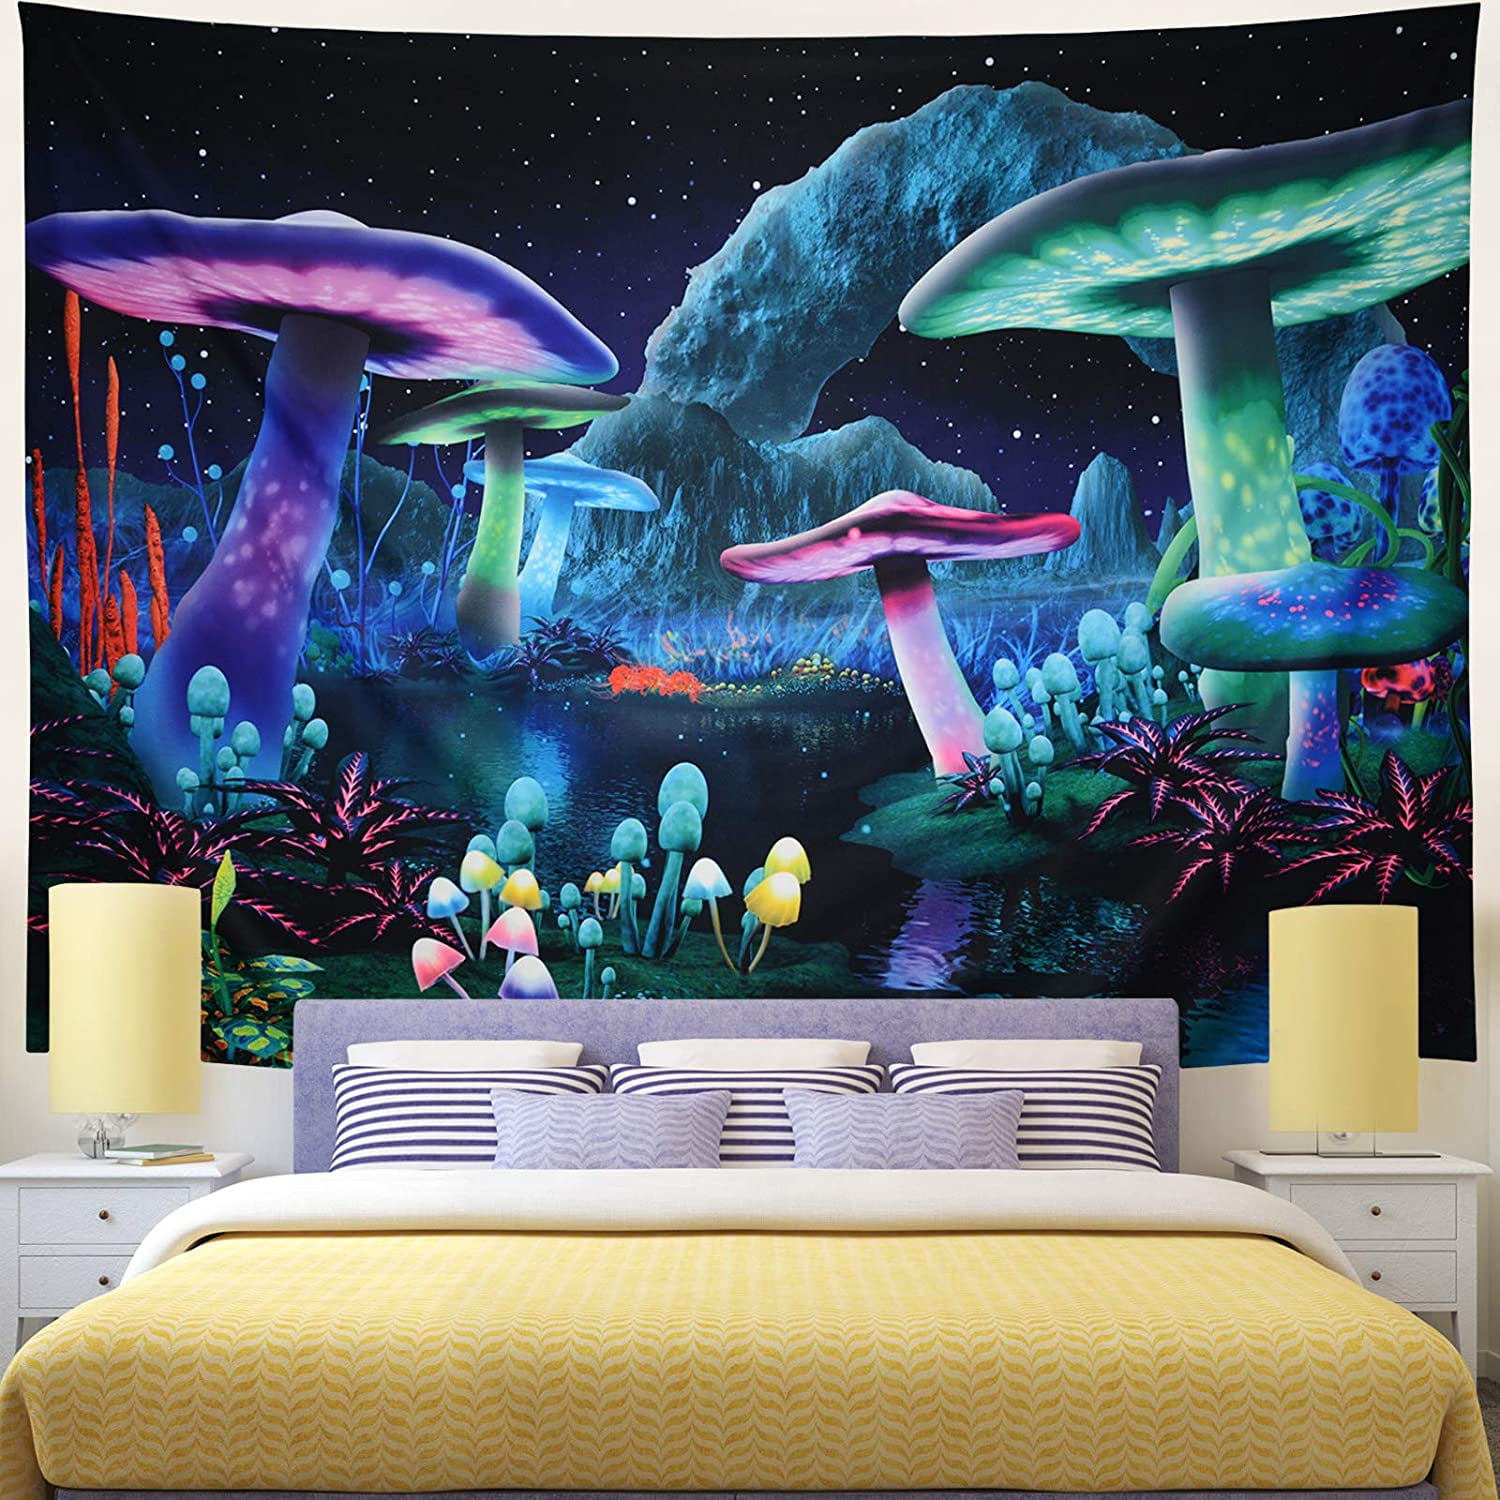 Wekoxo Psychedelic Mushroom Tapestry Starry Sky Tapestry Trippy Wall Tapestry Fantasy Plant Tapestry Wall Hanging for Home Decor S / 51.2 × 59.1